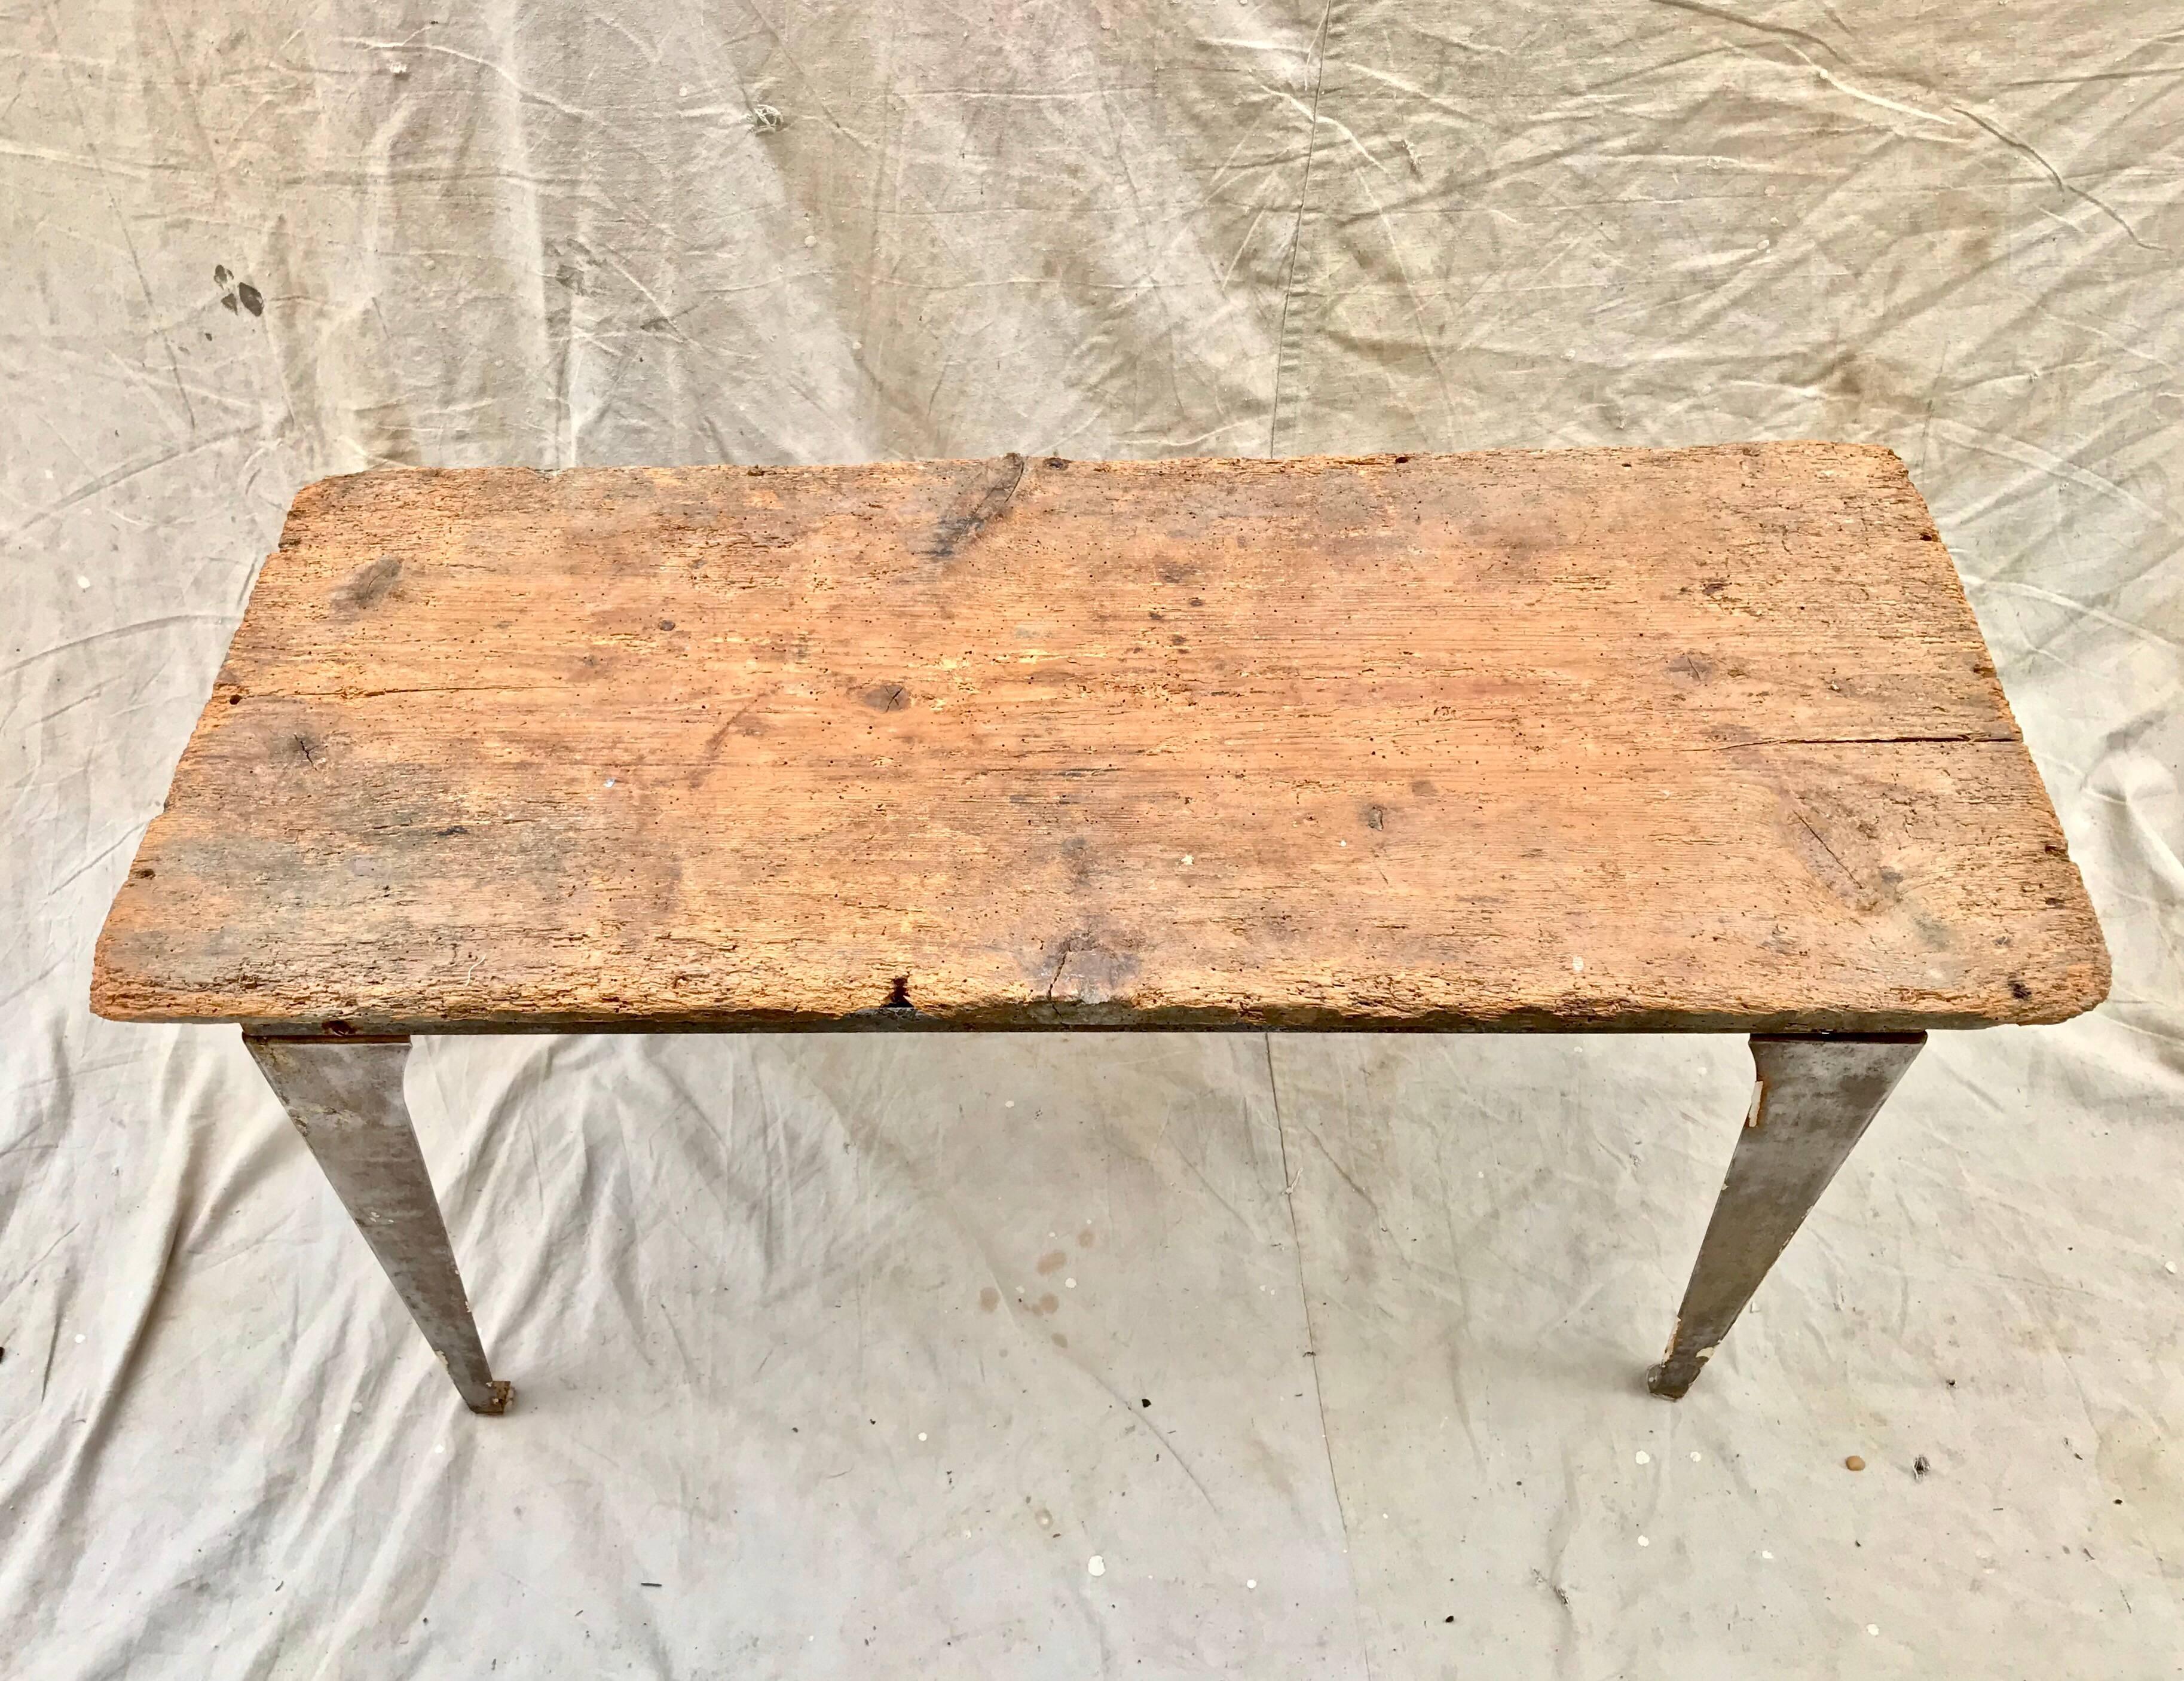 A useful and cool looking Industrial workbench of light steel having an added early 19th century pine top. The top adds a tremendous amount of warmth and patina, and allows the piece to also function as an art studio worktable.